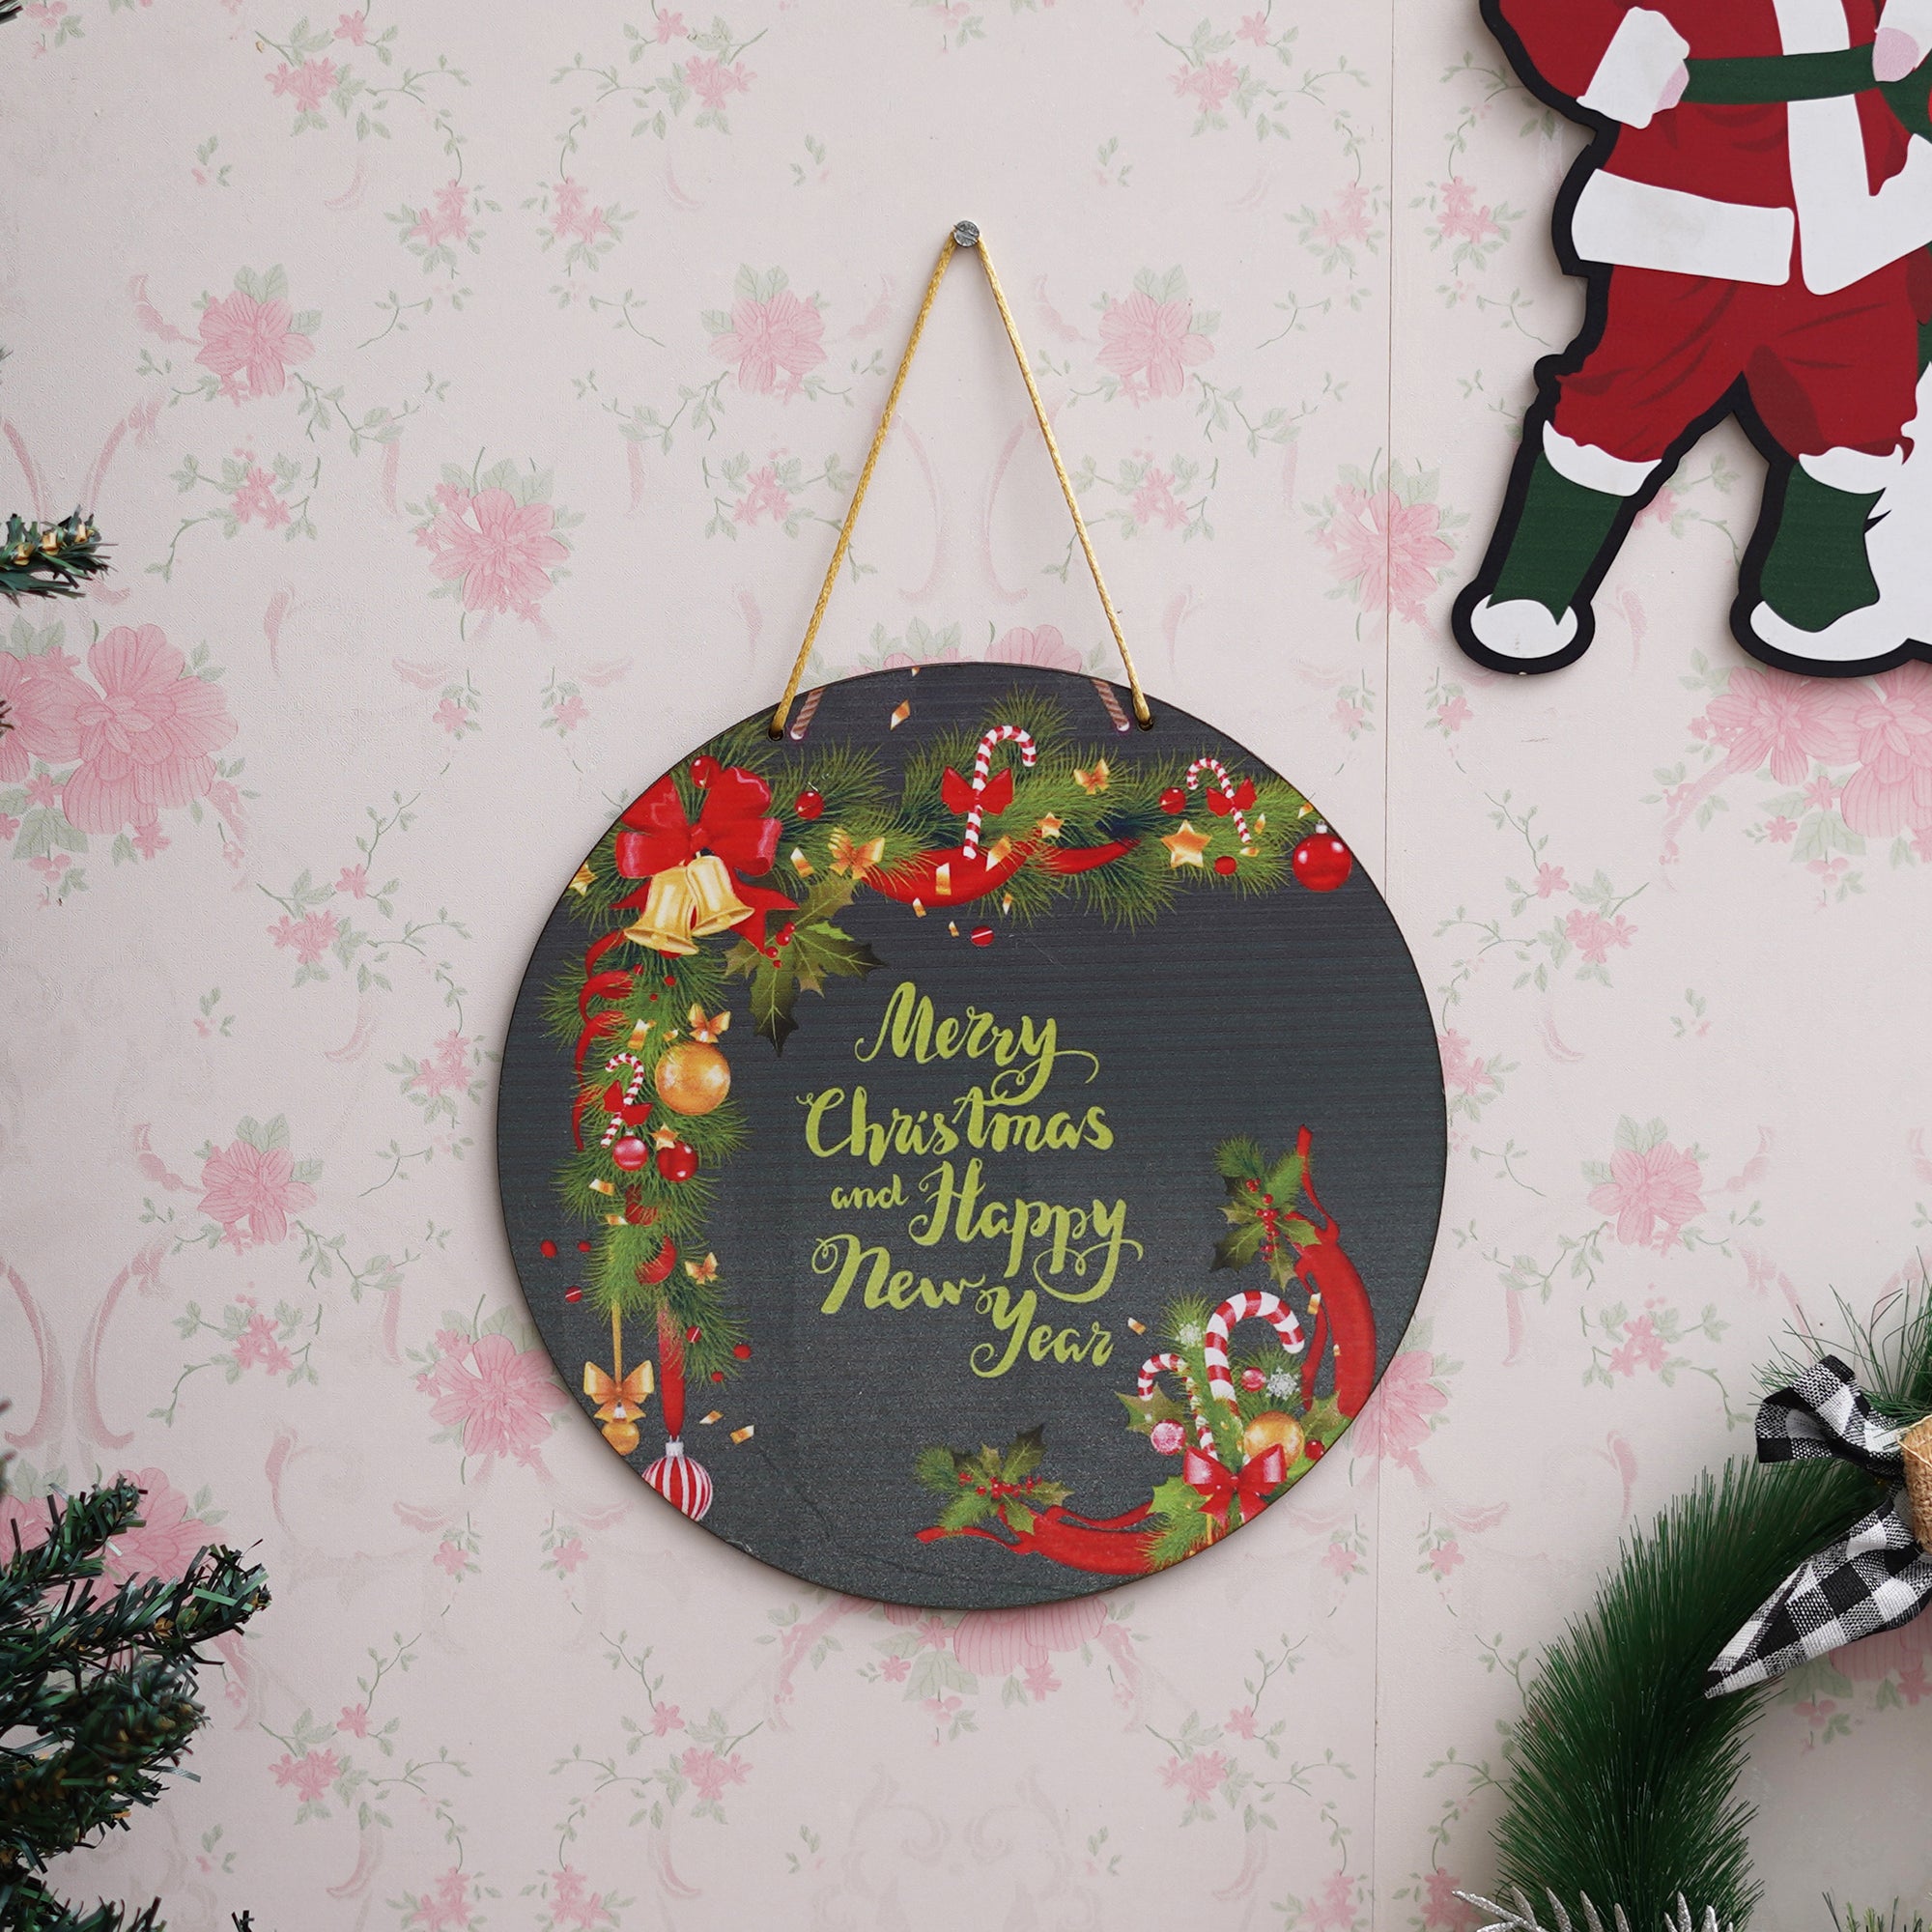 eCraftIndia "Merry Christmas and Happy New Year" Printed Wall/Door Hanging for Home and Christmas Decorations (Green, Red, Golden)